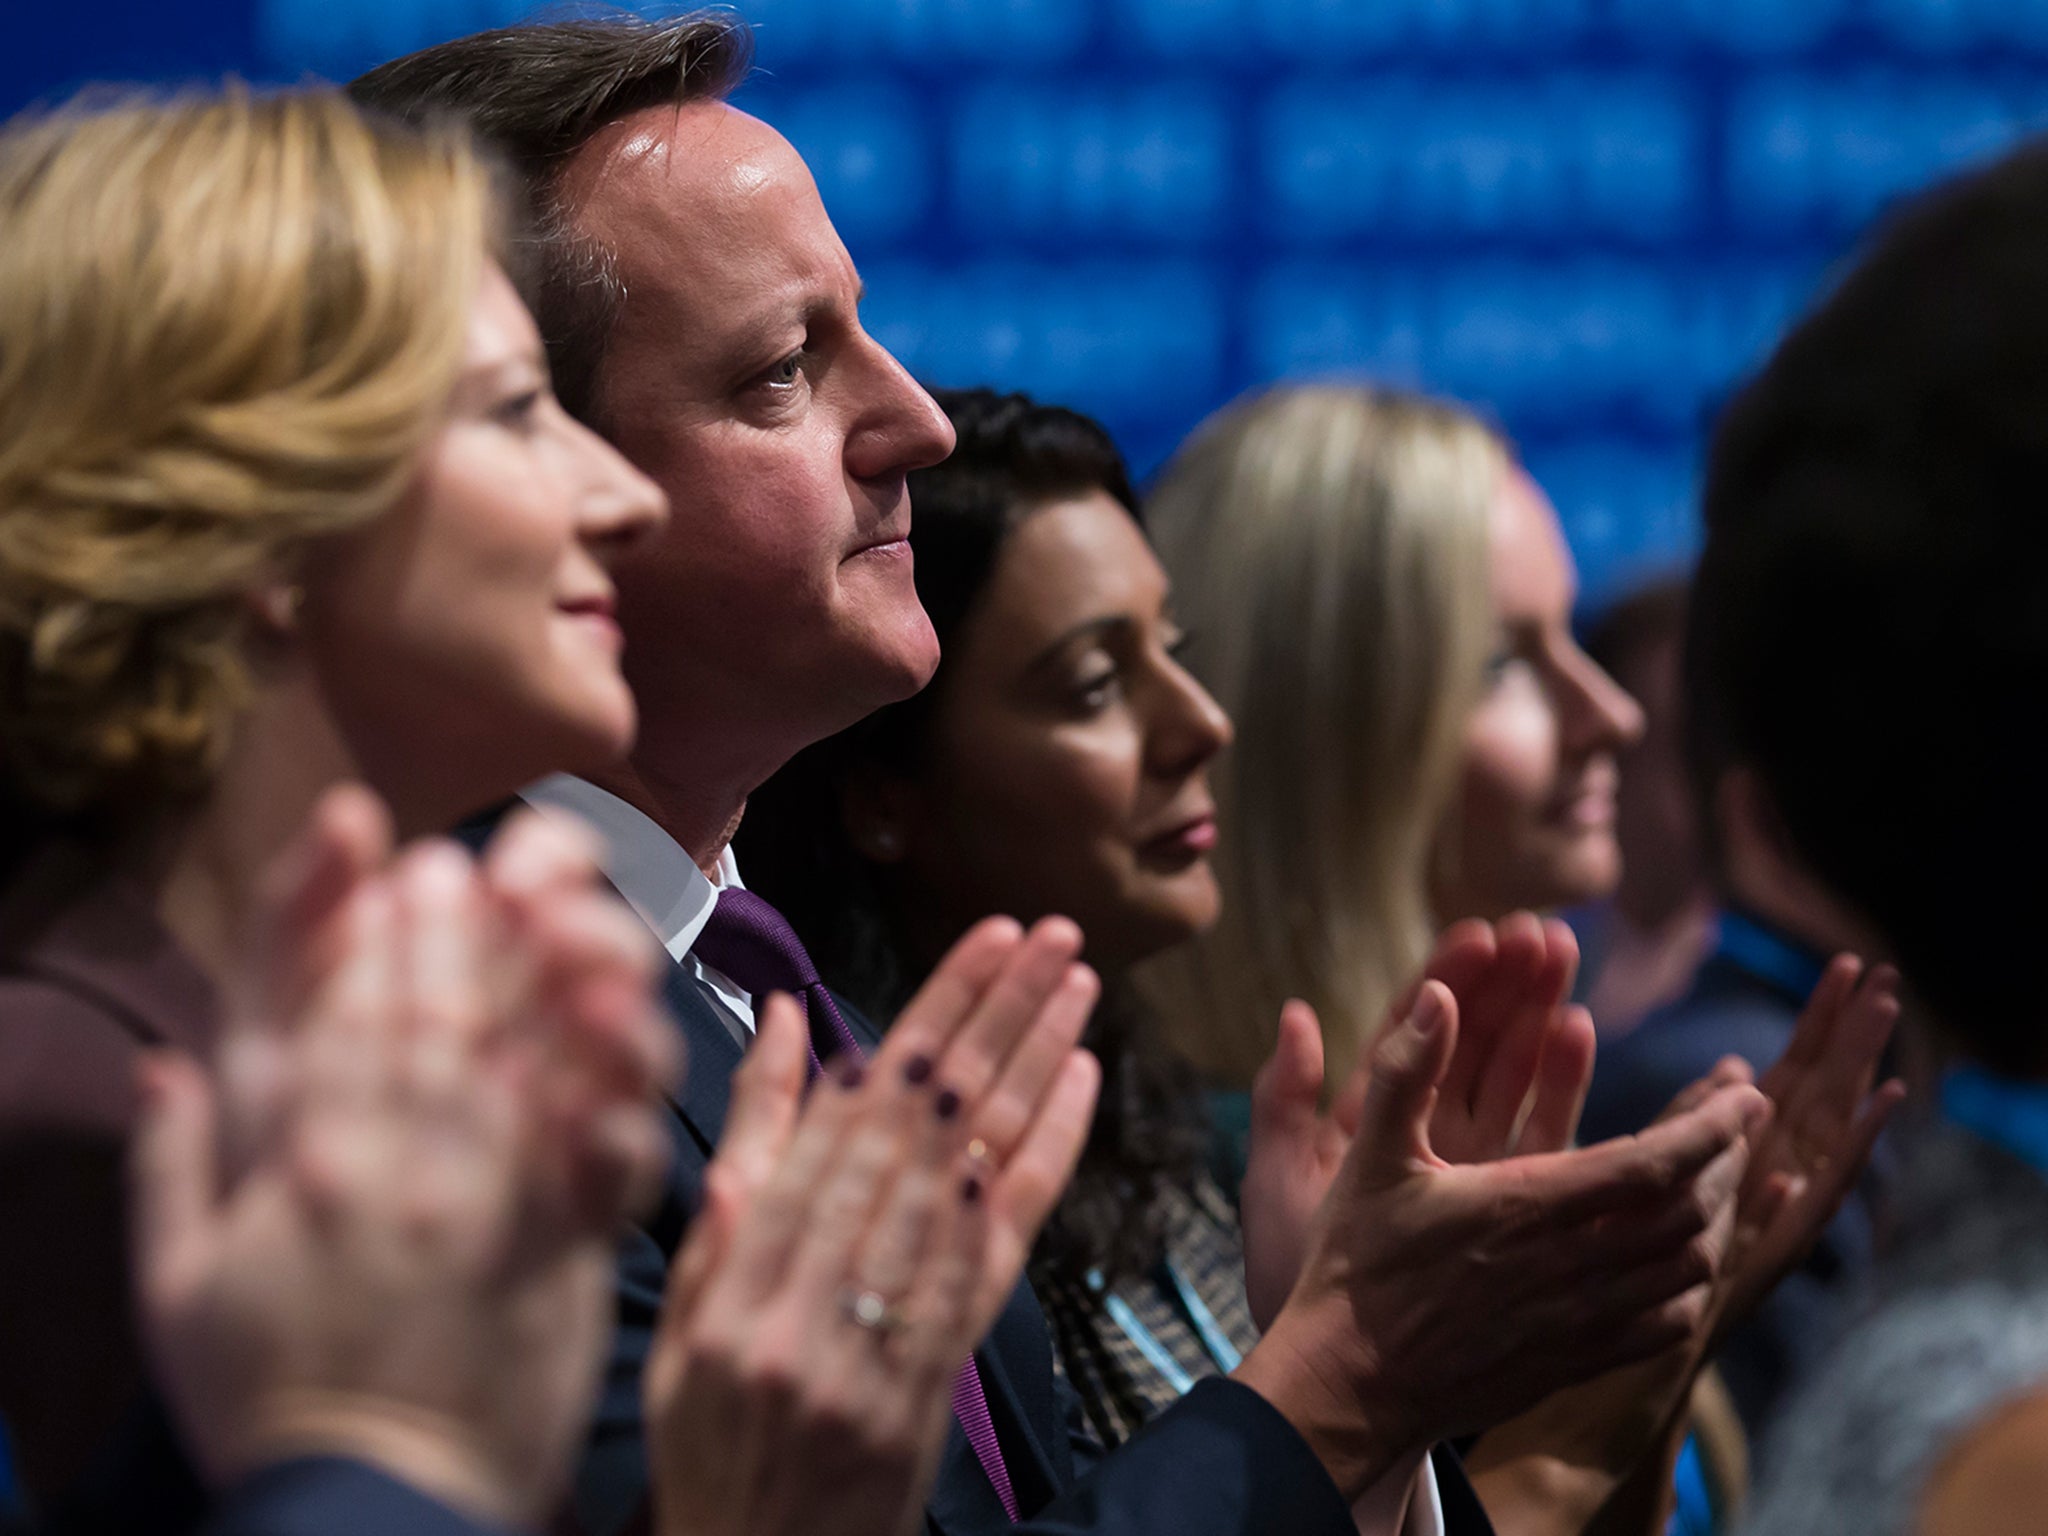 David Cameron applauds after listening to a speech by Chancellor of the Exchequer George Osborne, during the Conservative Party Conference, in Manchester